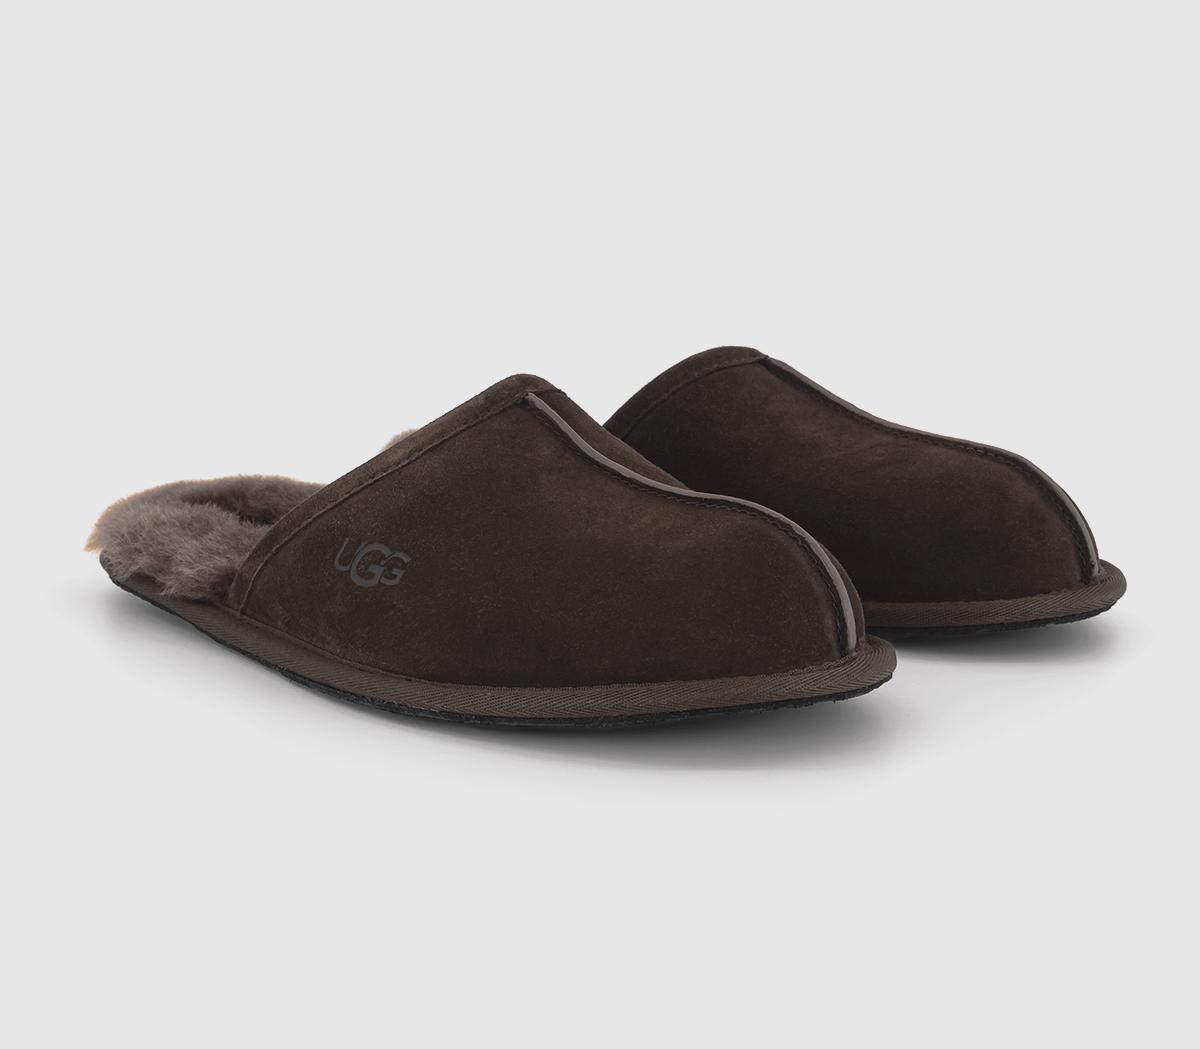 UGG Mens Scuff Slippers Dusted Cocoa, 6